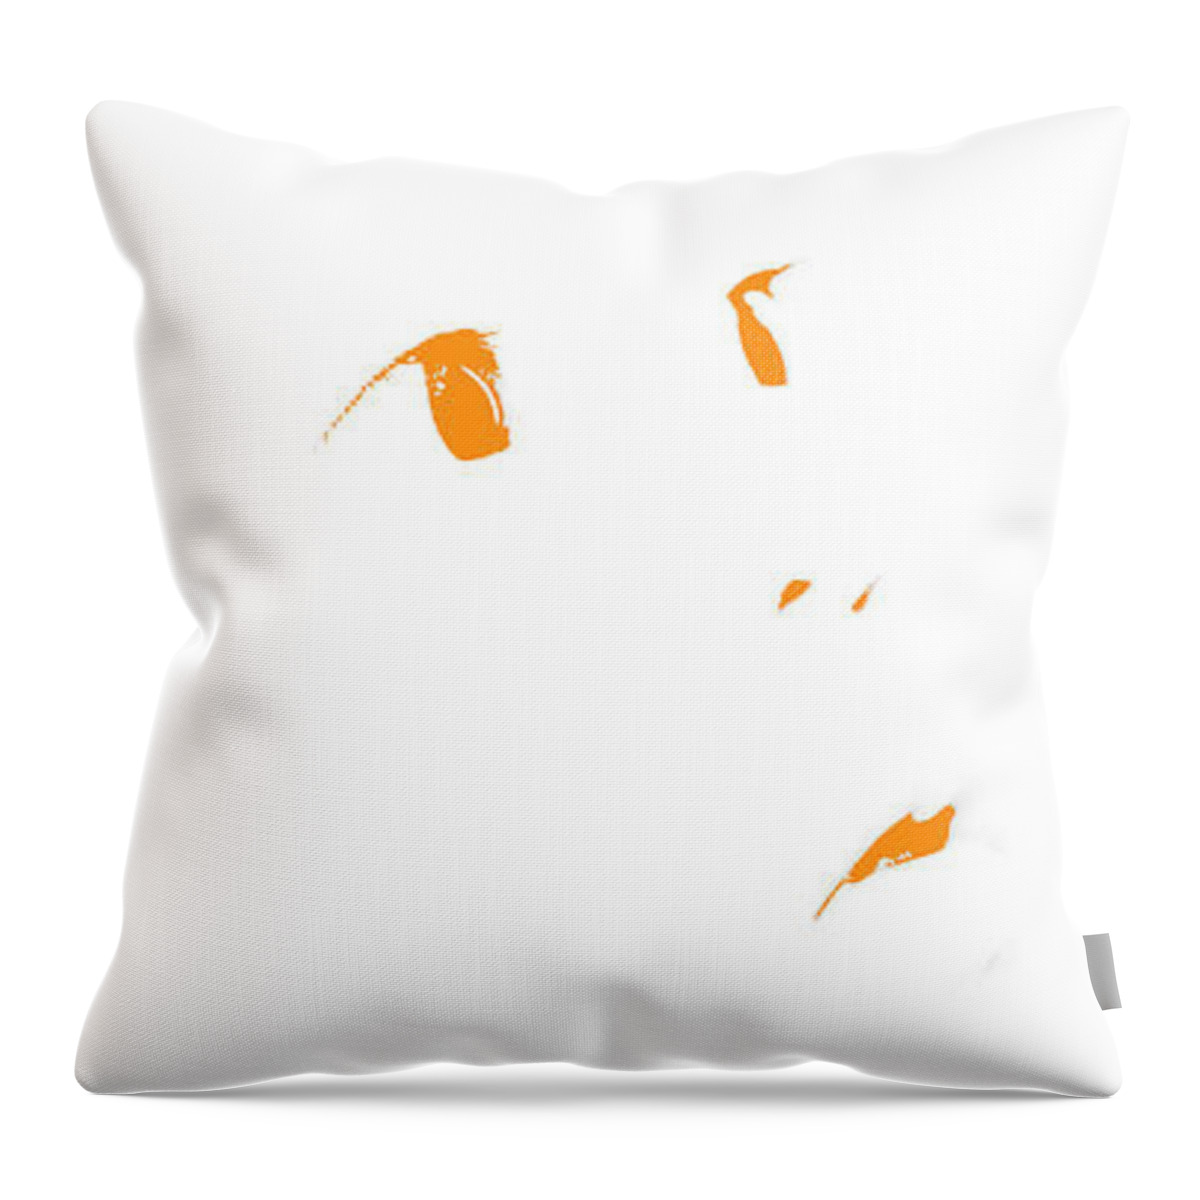  Throw Pillow featuring the photograph In Wonder We Look by Jez C Self